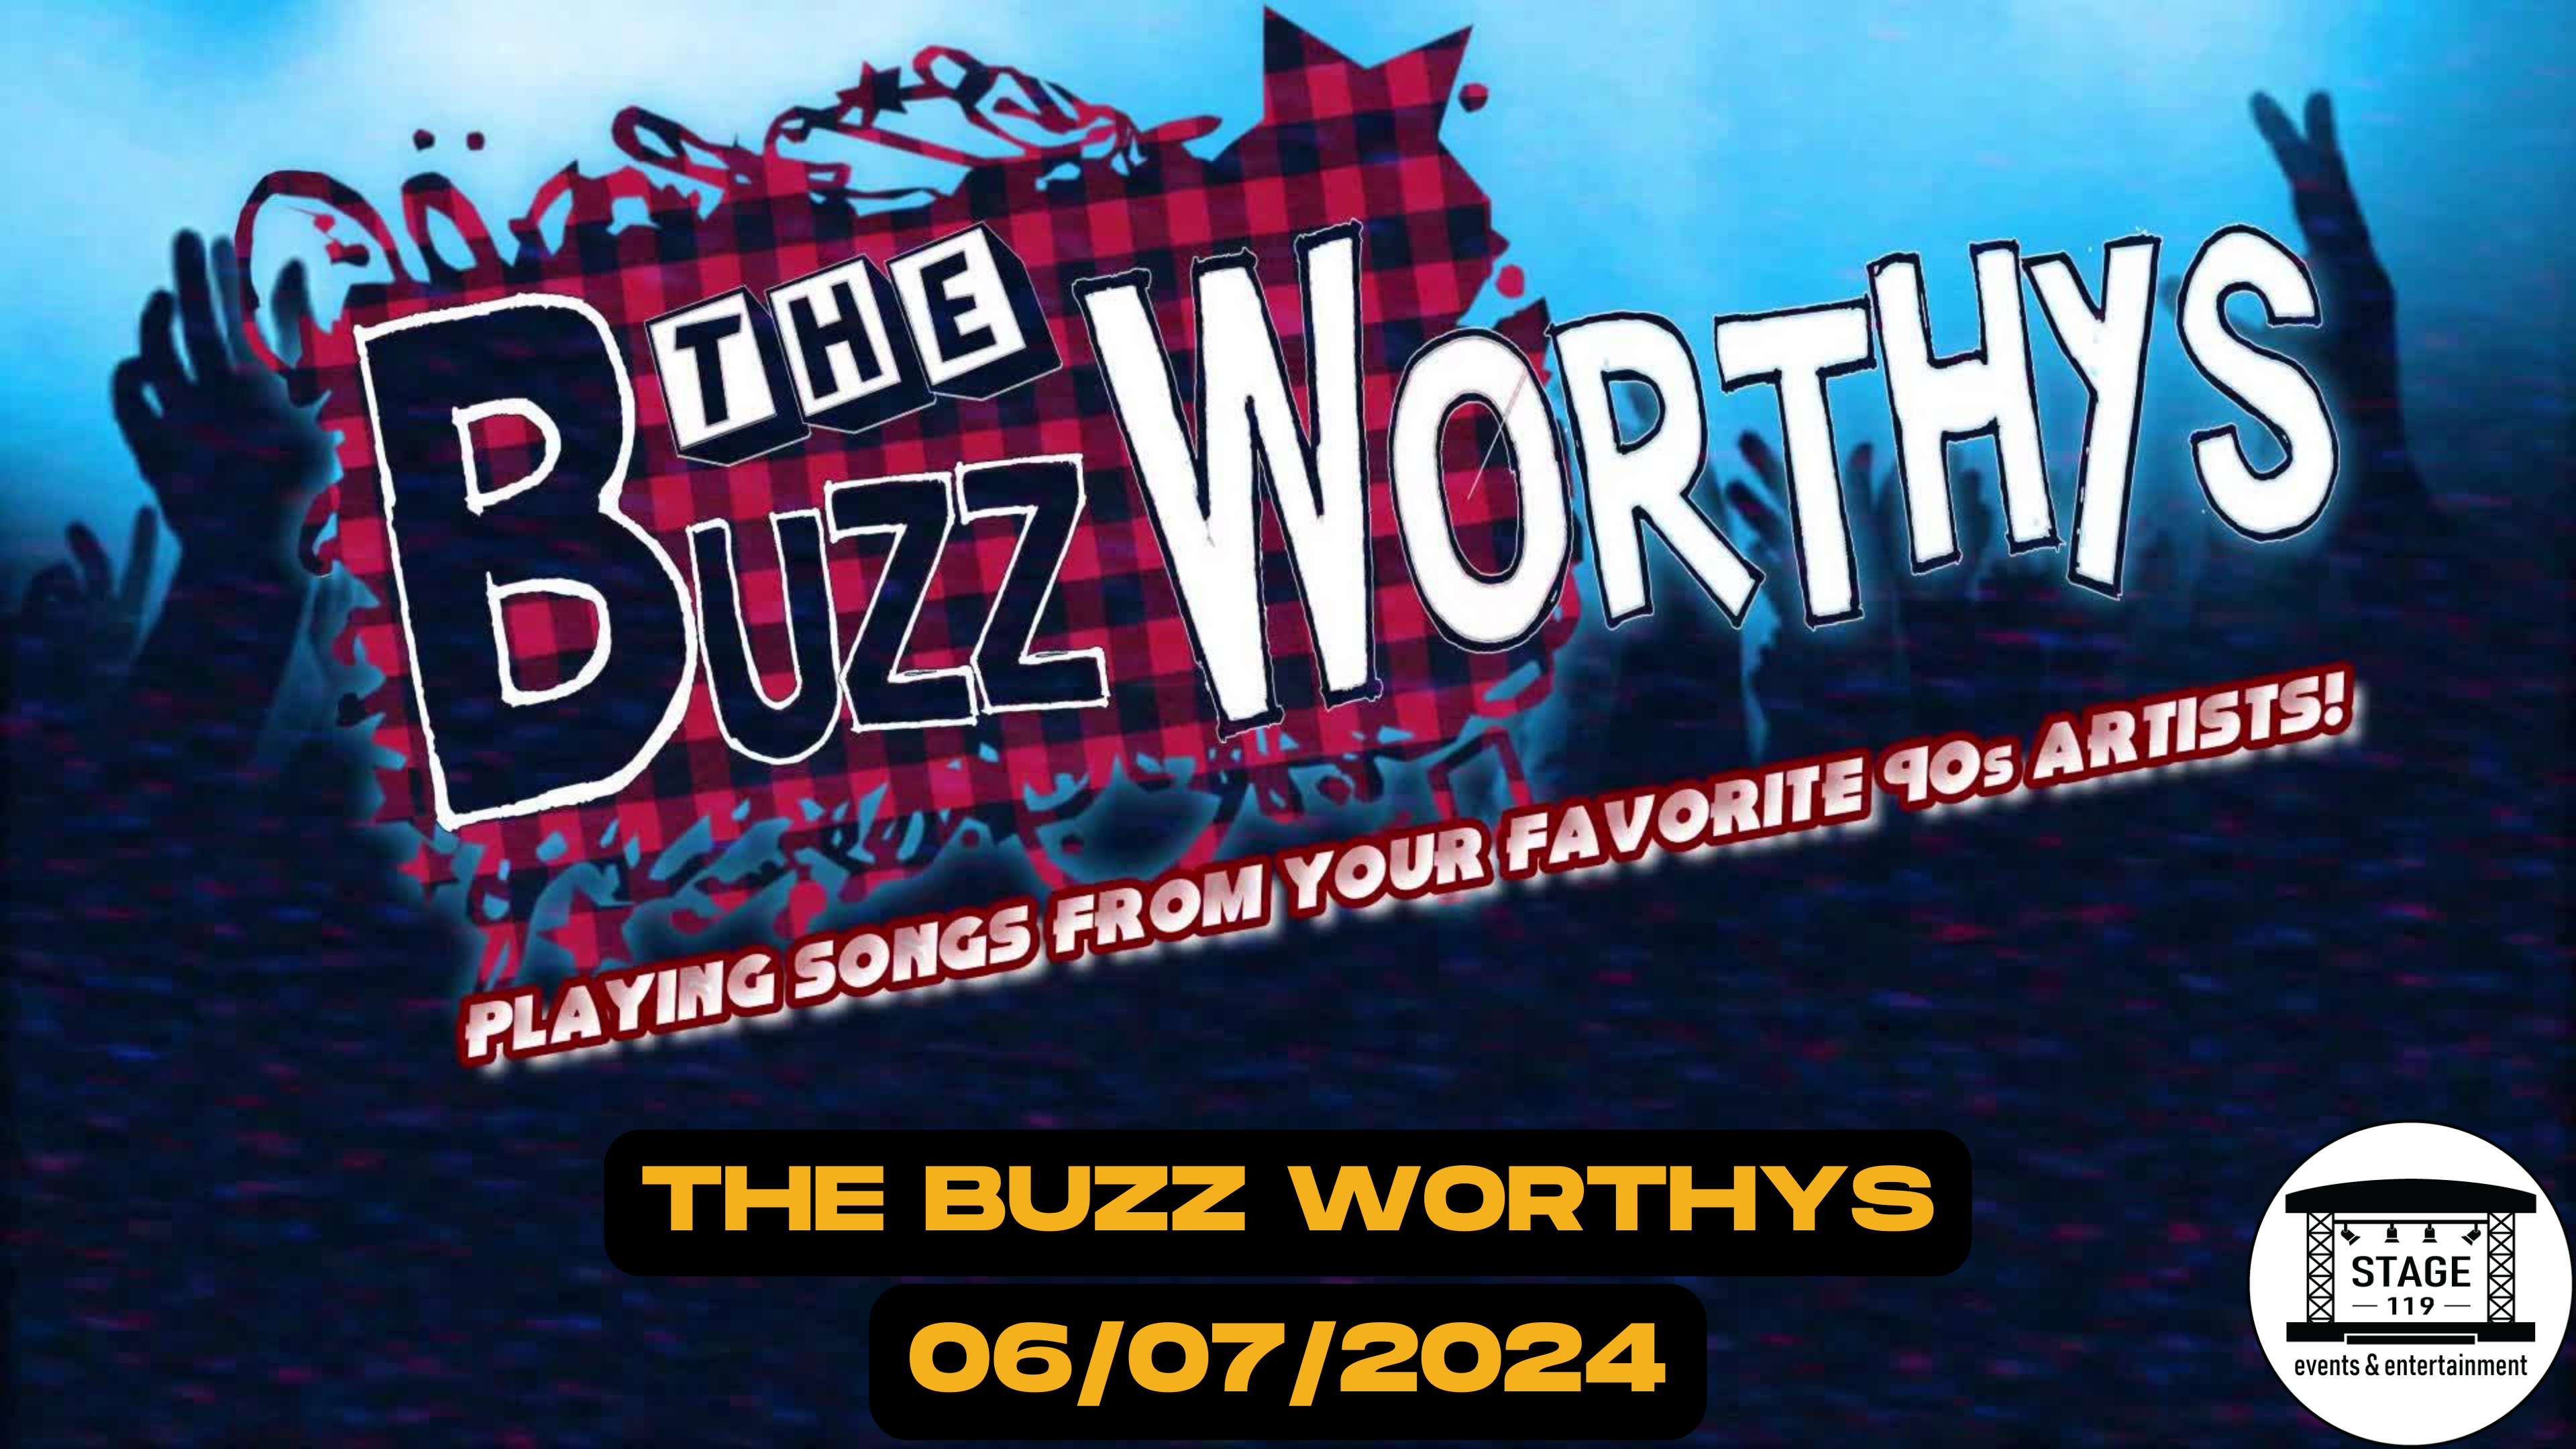 THE BUZZ WORTHYS at Stage 119